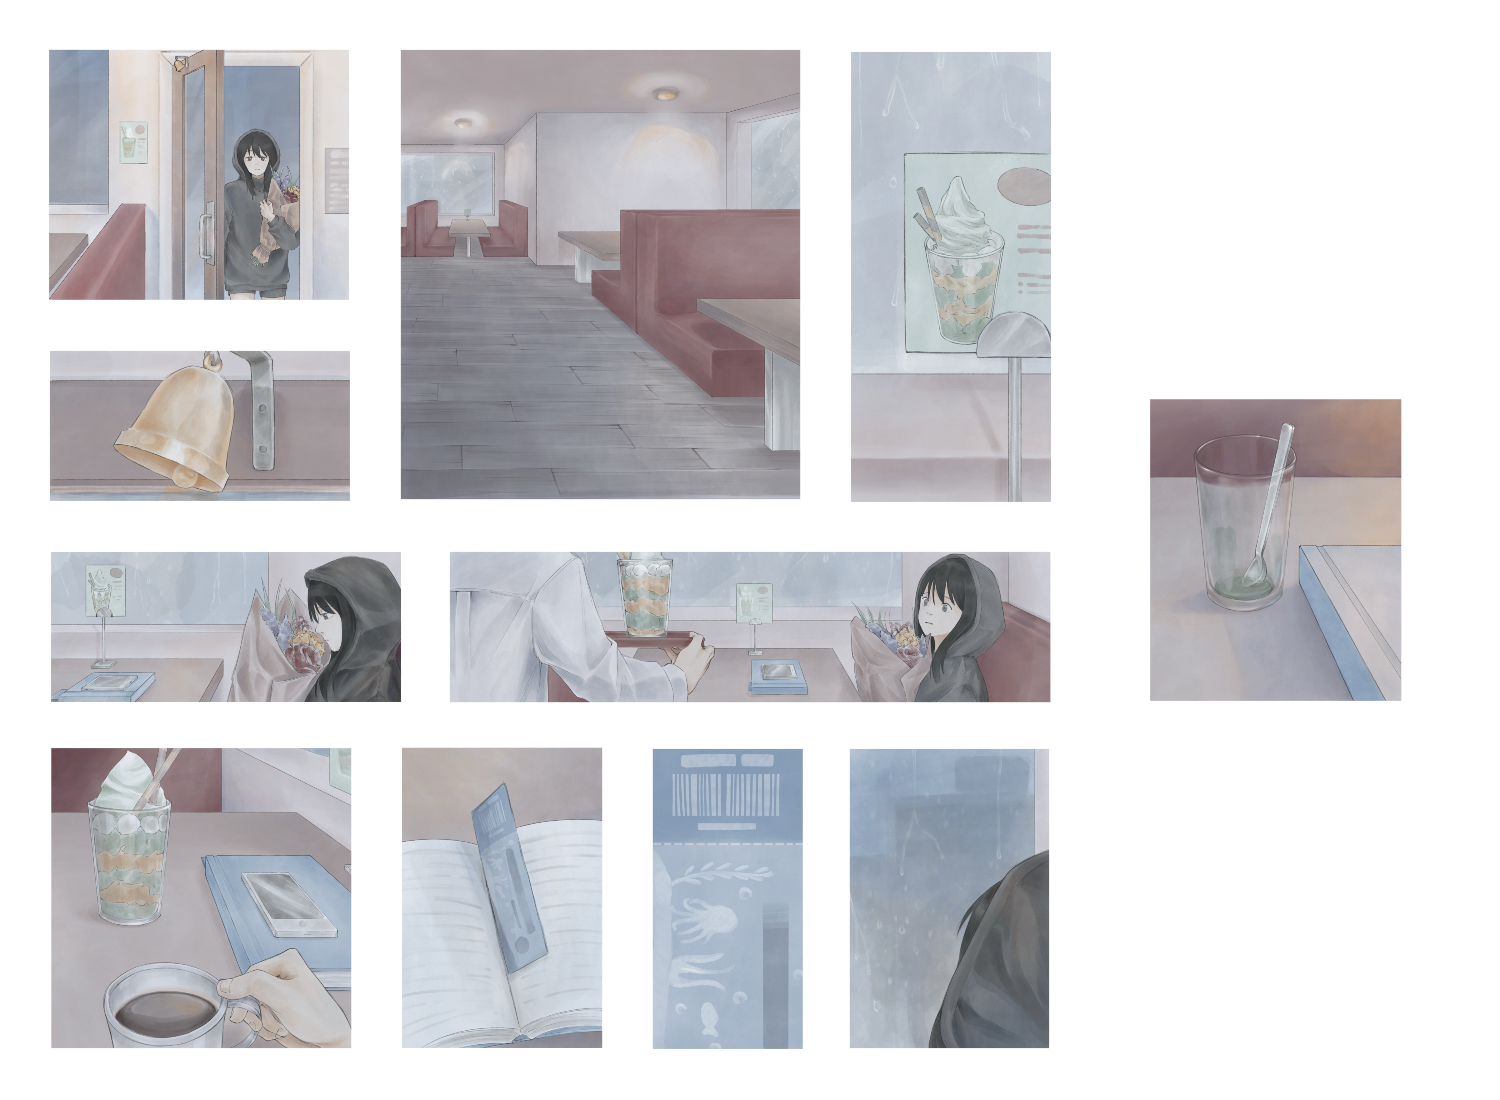 Panels of the girl with the bouquet of flowers going into a cafe and ordering the newest menu option. While she enjoys her dessert, she finds an aquarium ticket in her book and decides to go.